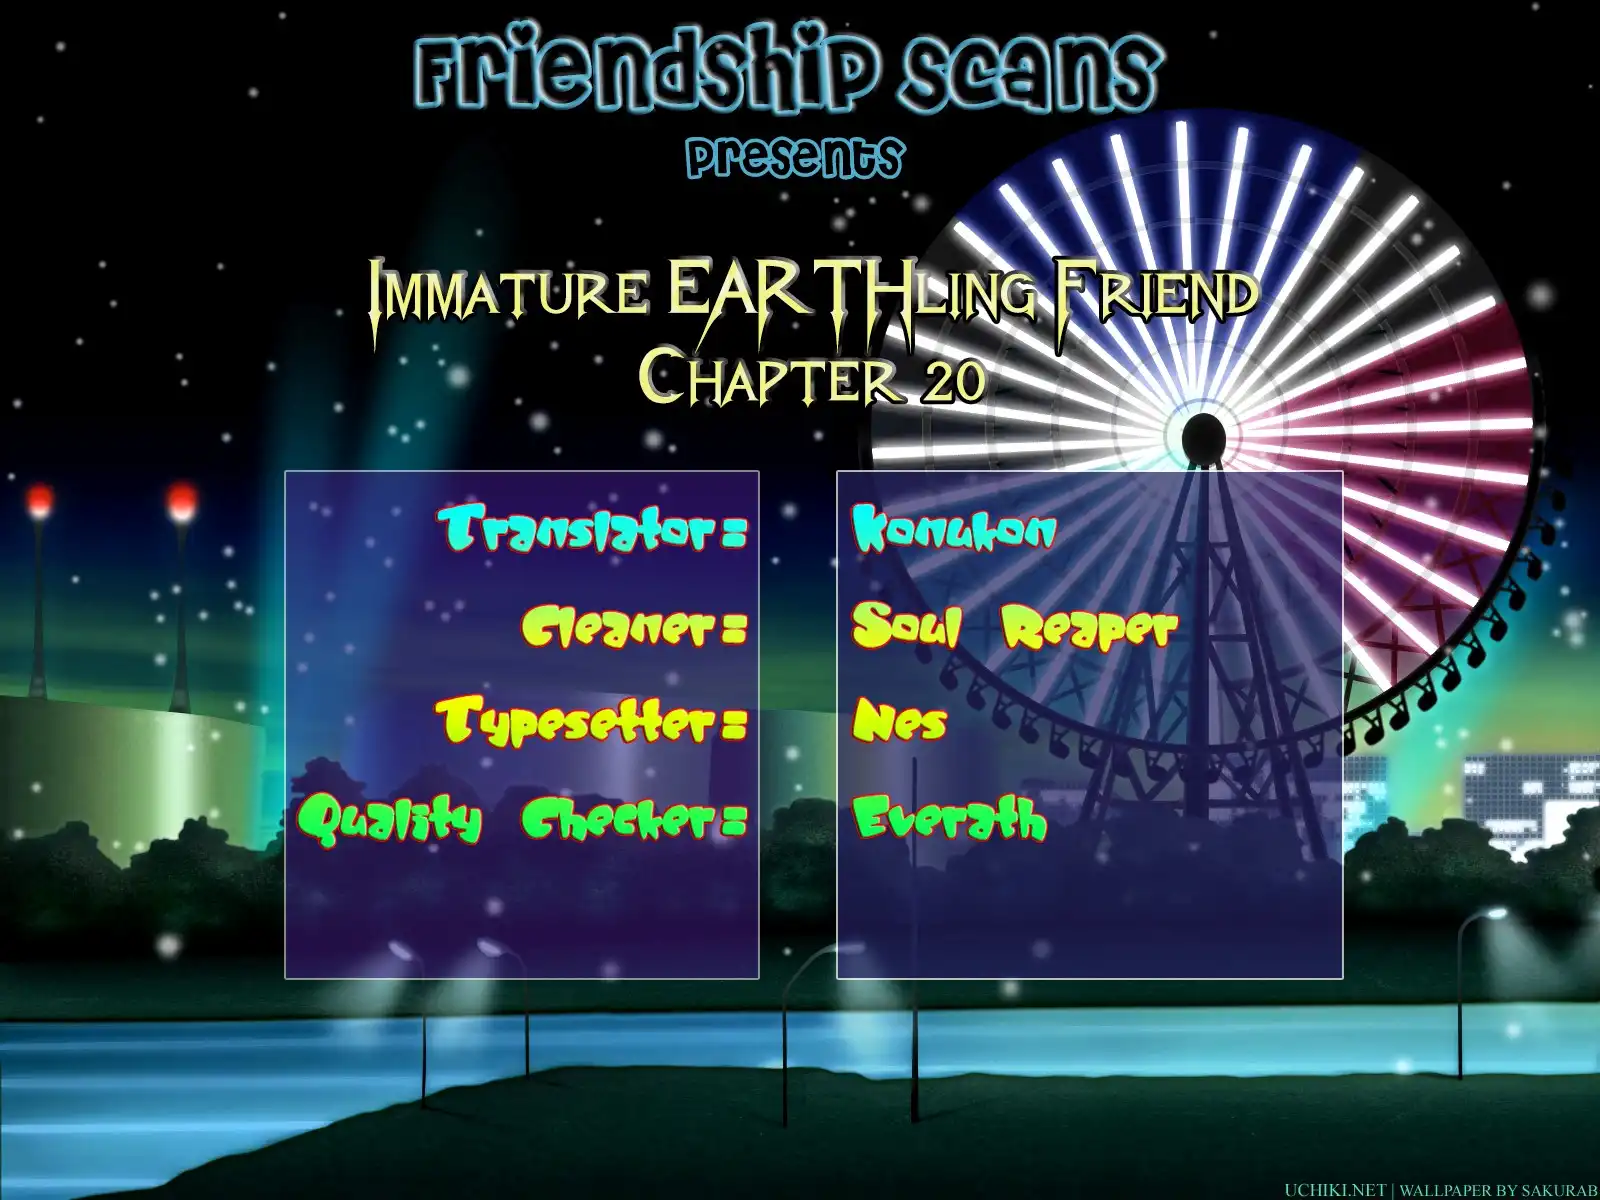 Immature Earthling Friend Chapter 20